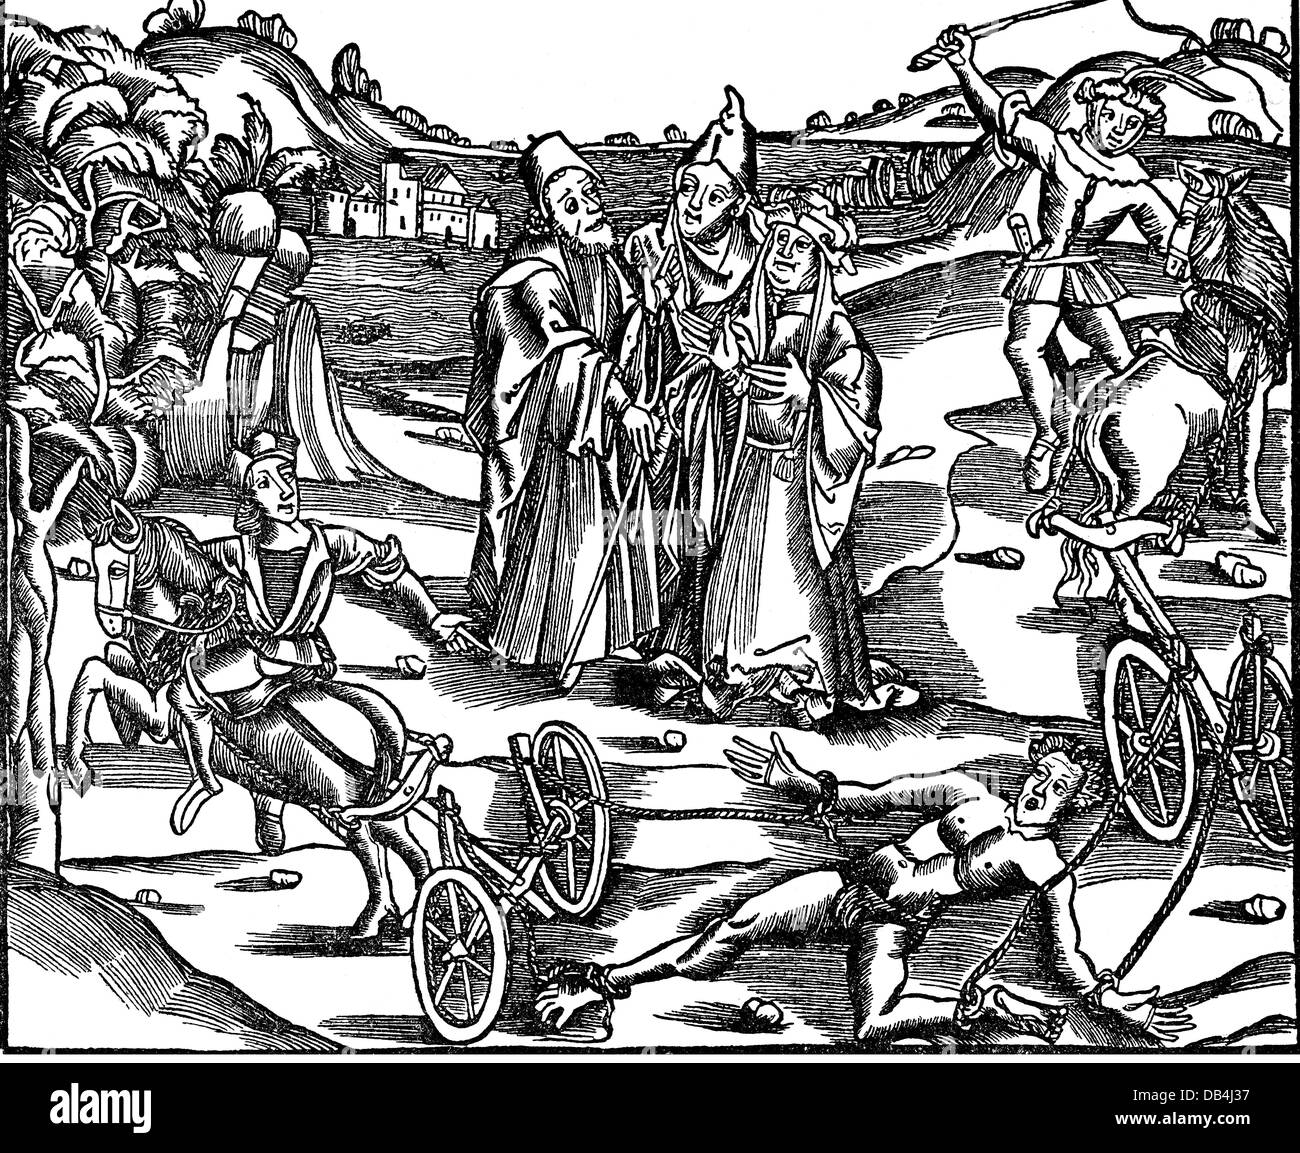 justice, penitentiary system, dismemberment, woodcut, from: Livy, Historiy of Rome, print: Johann Schöffer, Mainz, 1514, Additional-Rights-Clearences-Not Available Stock Photo